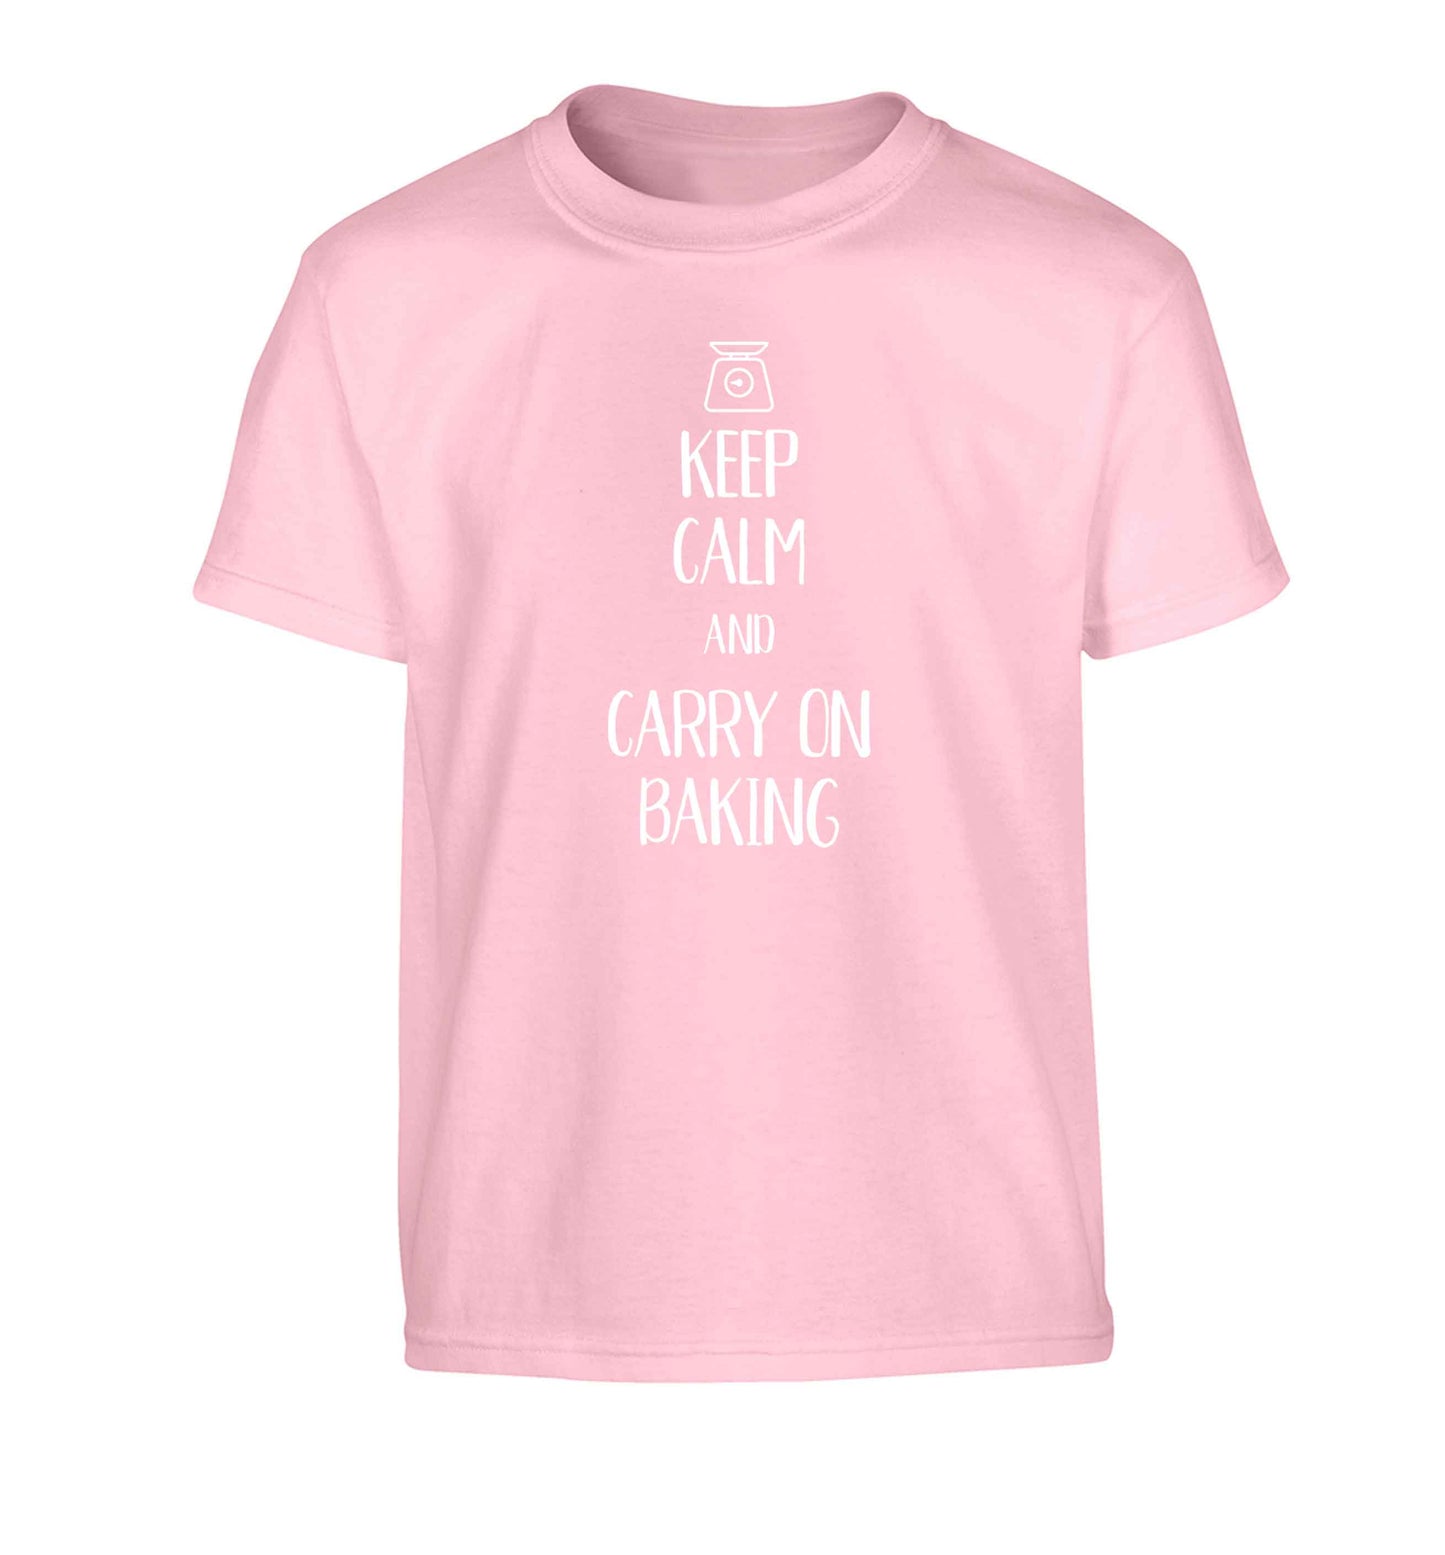 Keep calm and carry on baking Children's light pink Tshirt 12-13 Years